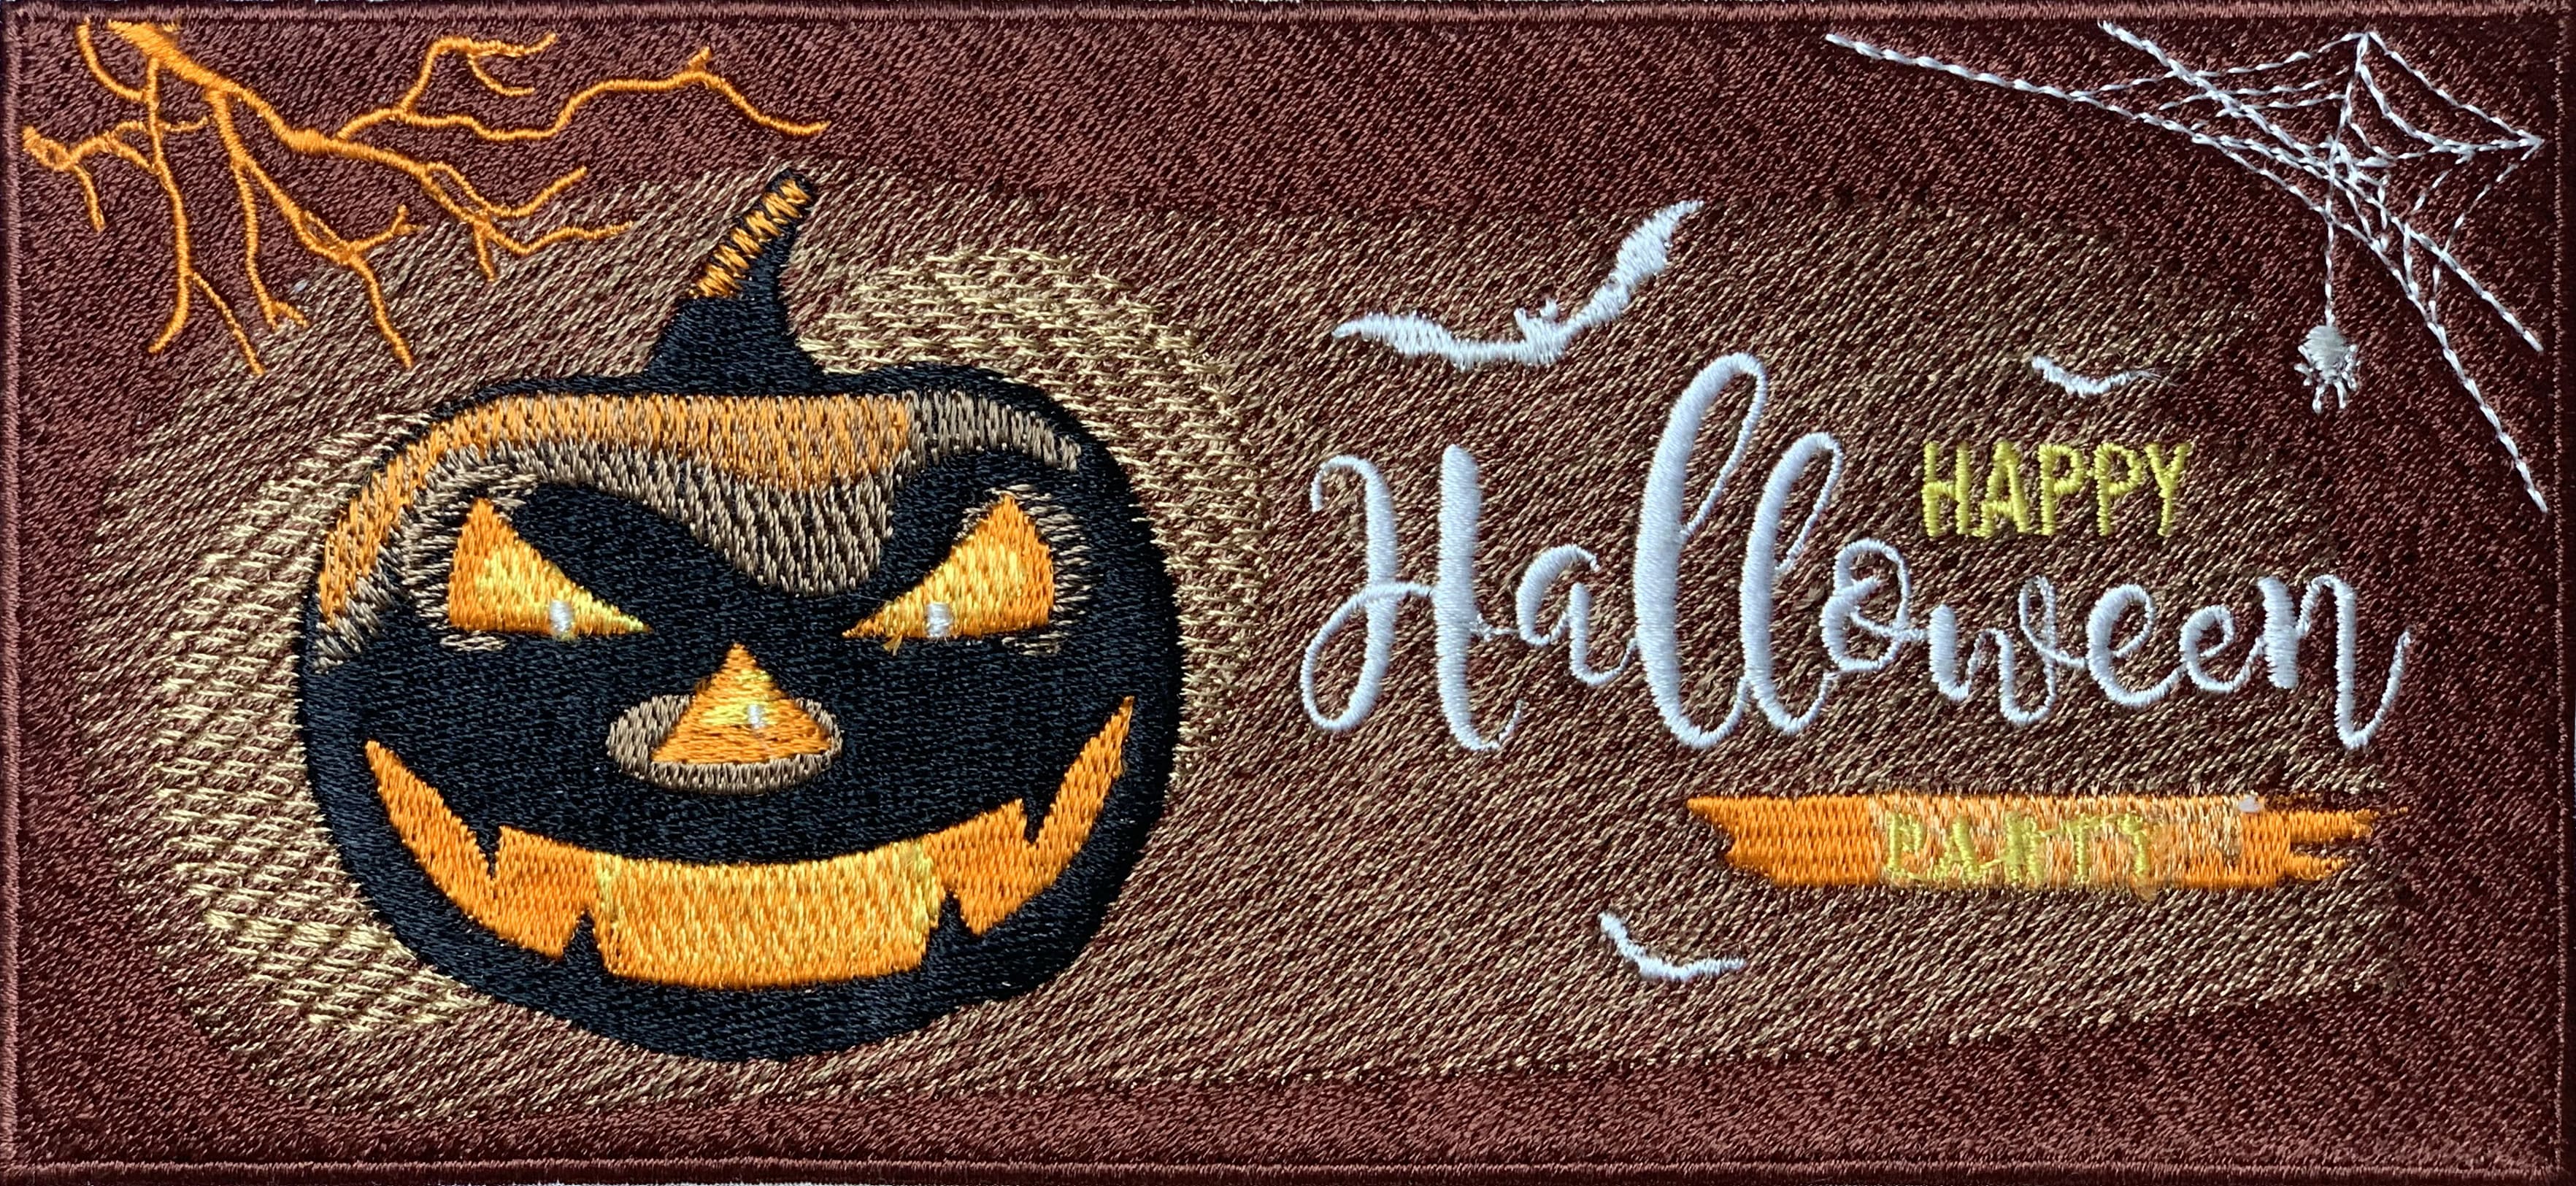 embroidery design of Halloween zombie running with a pumpkin